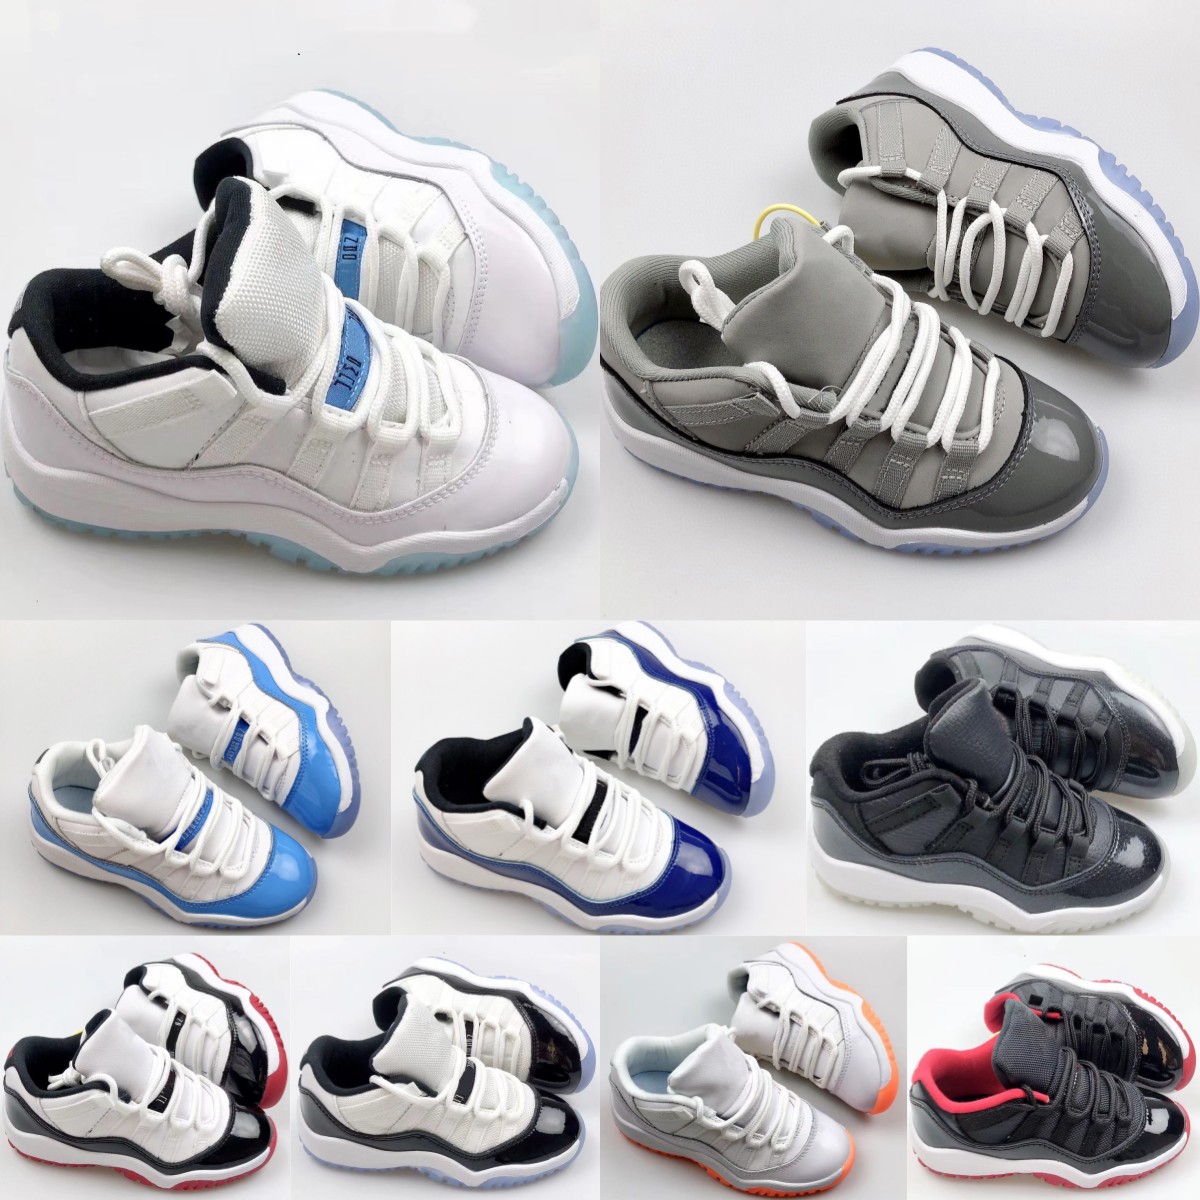 

kids shoes 11s basketball 11 Low Children sneakers Boys girls kid Runners youth toddlers Sport trainers Outdoor Athletic shoe black grey designer Running Sneaker